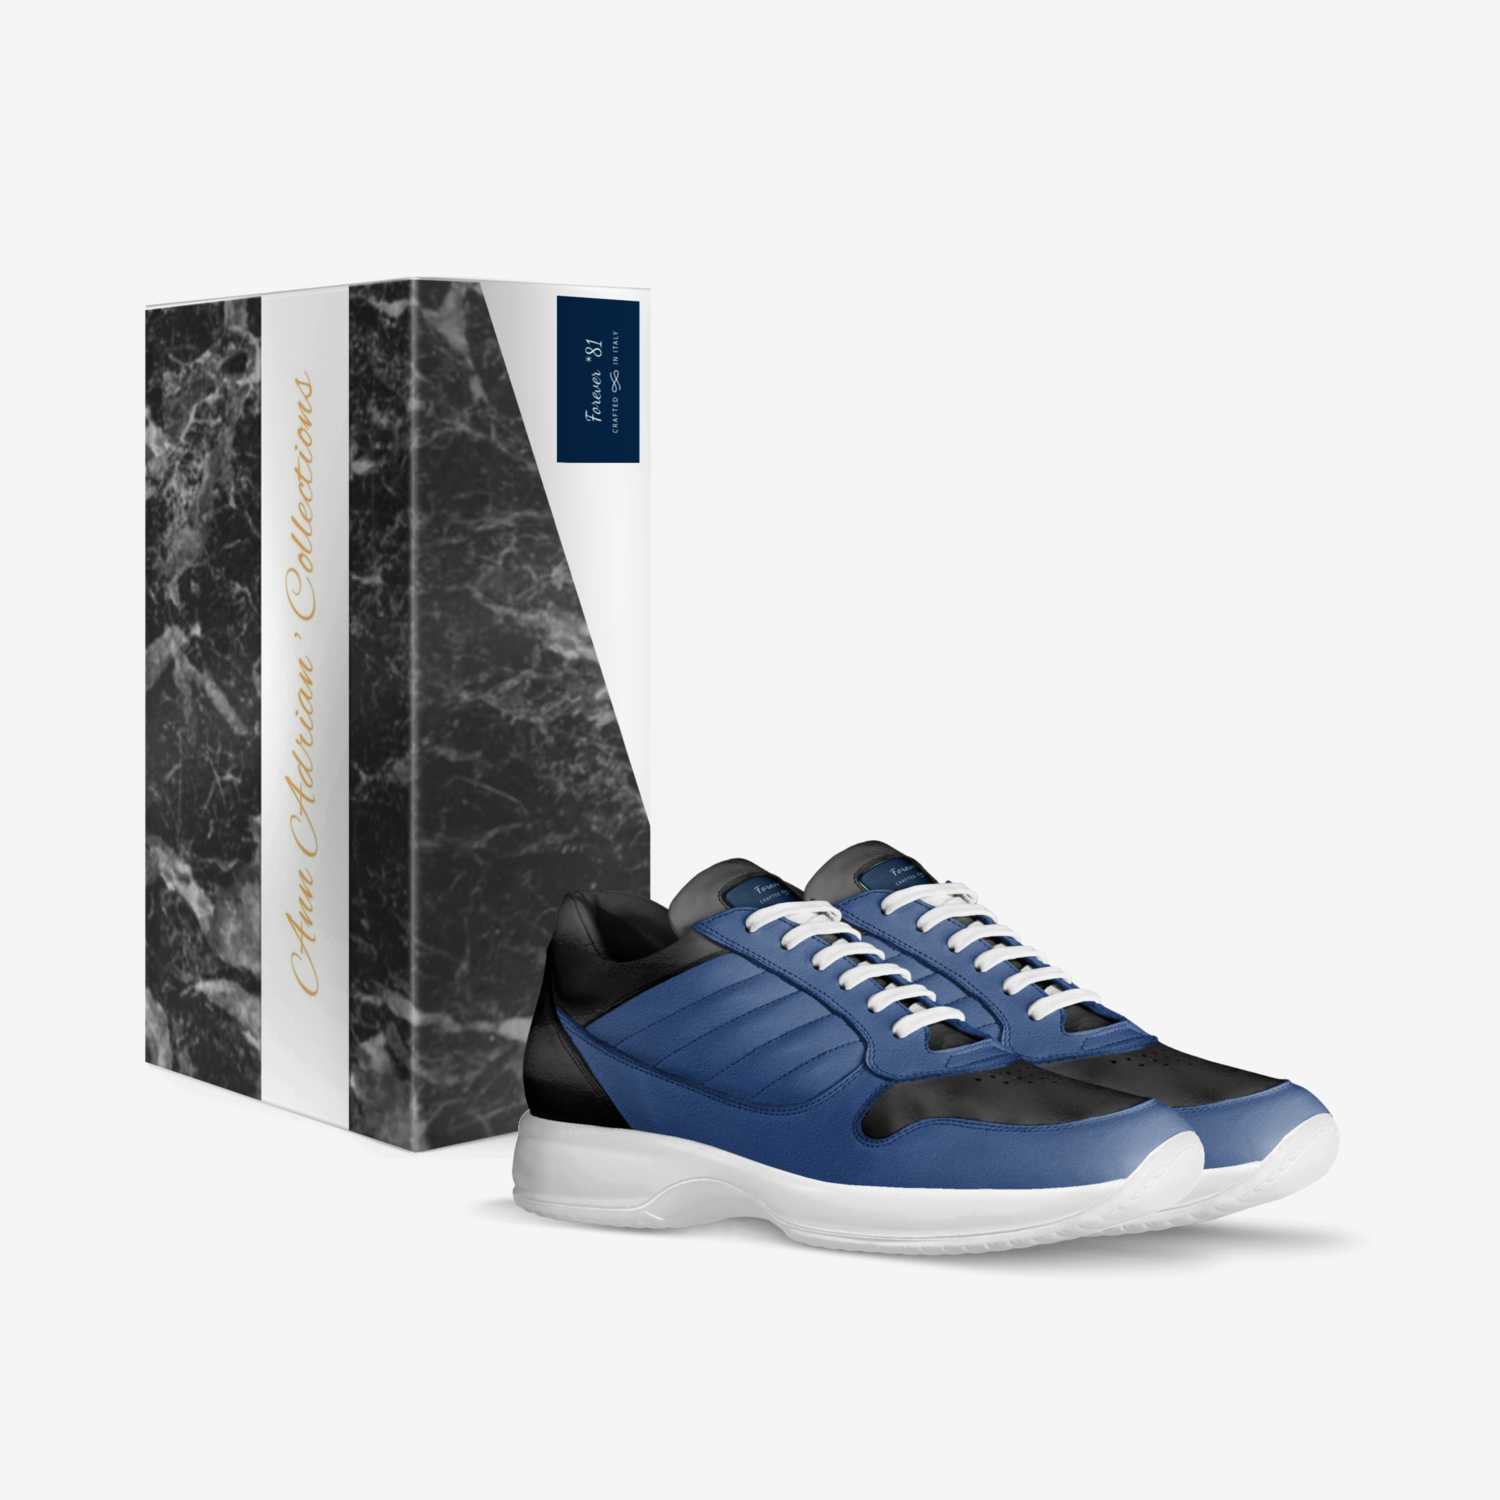 Blue Neo Runner custom made in Italy shoes by Dante Pates | Box view